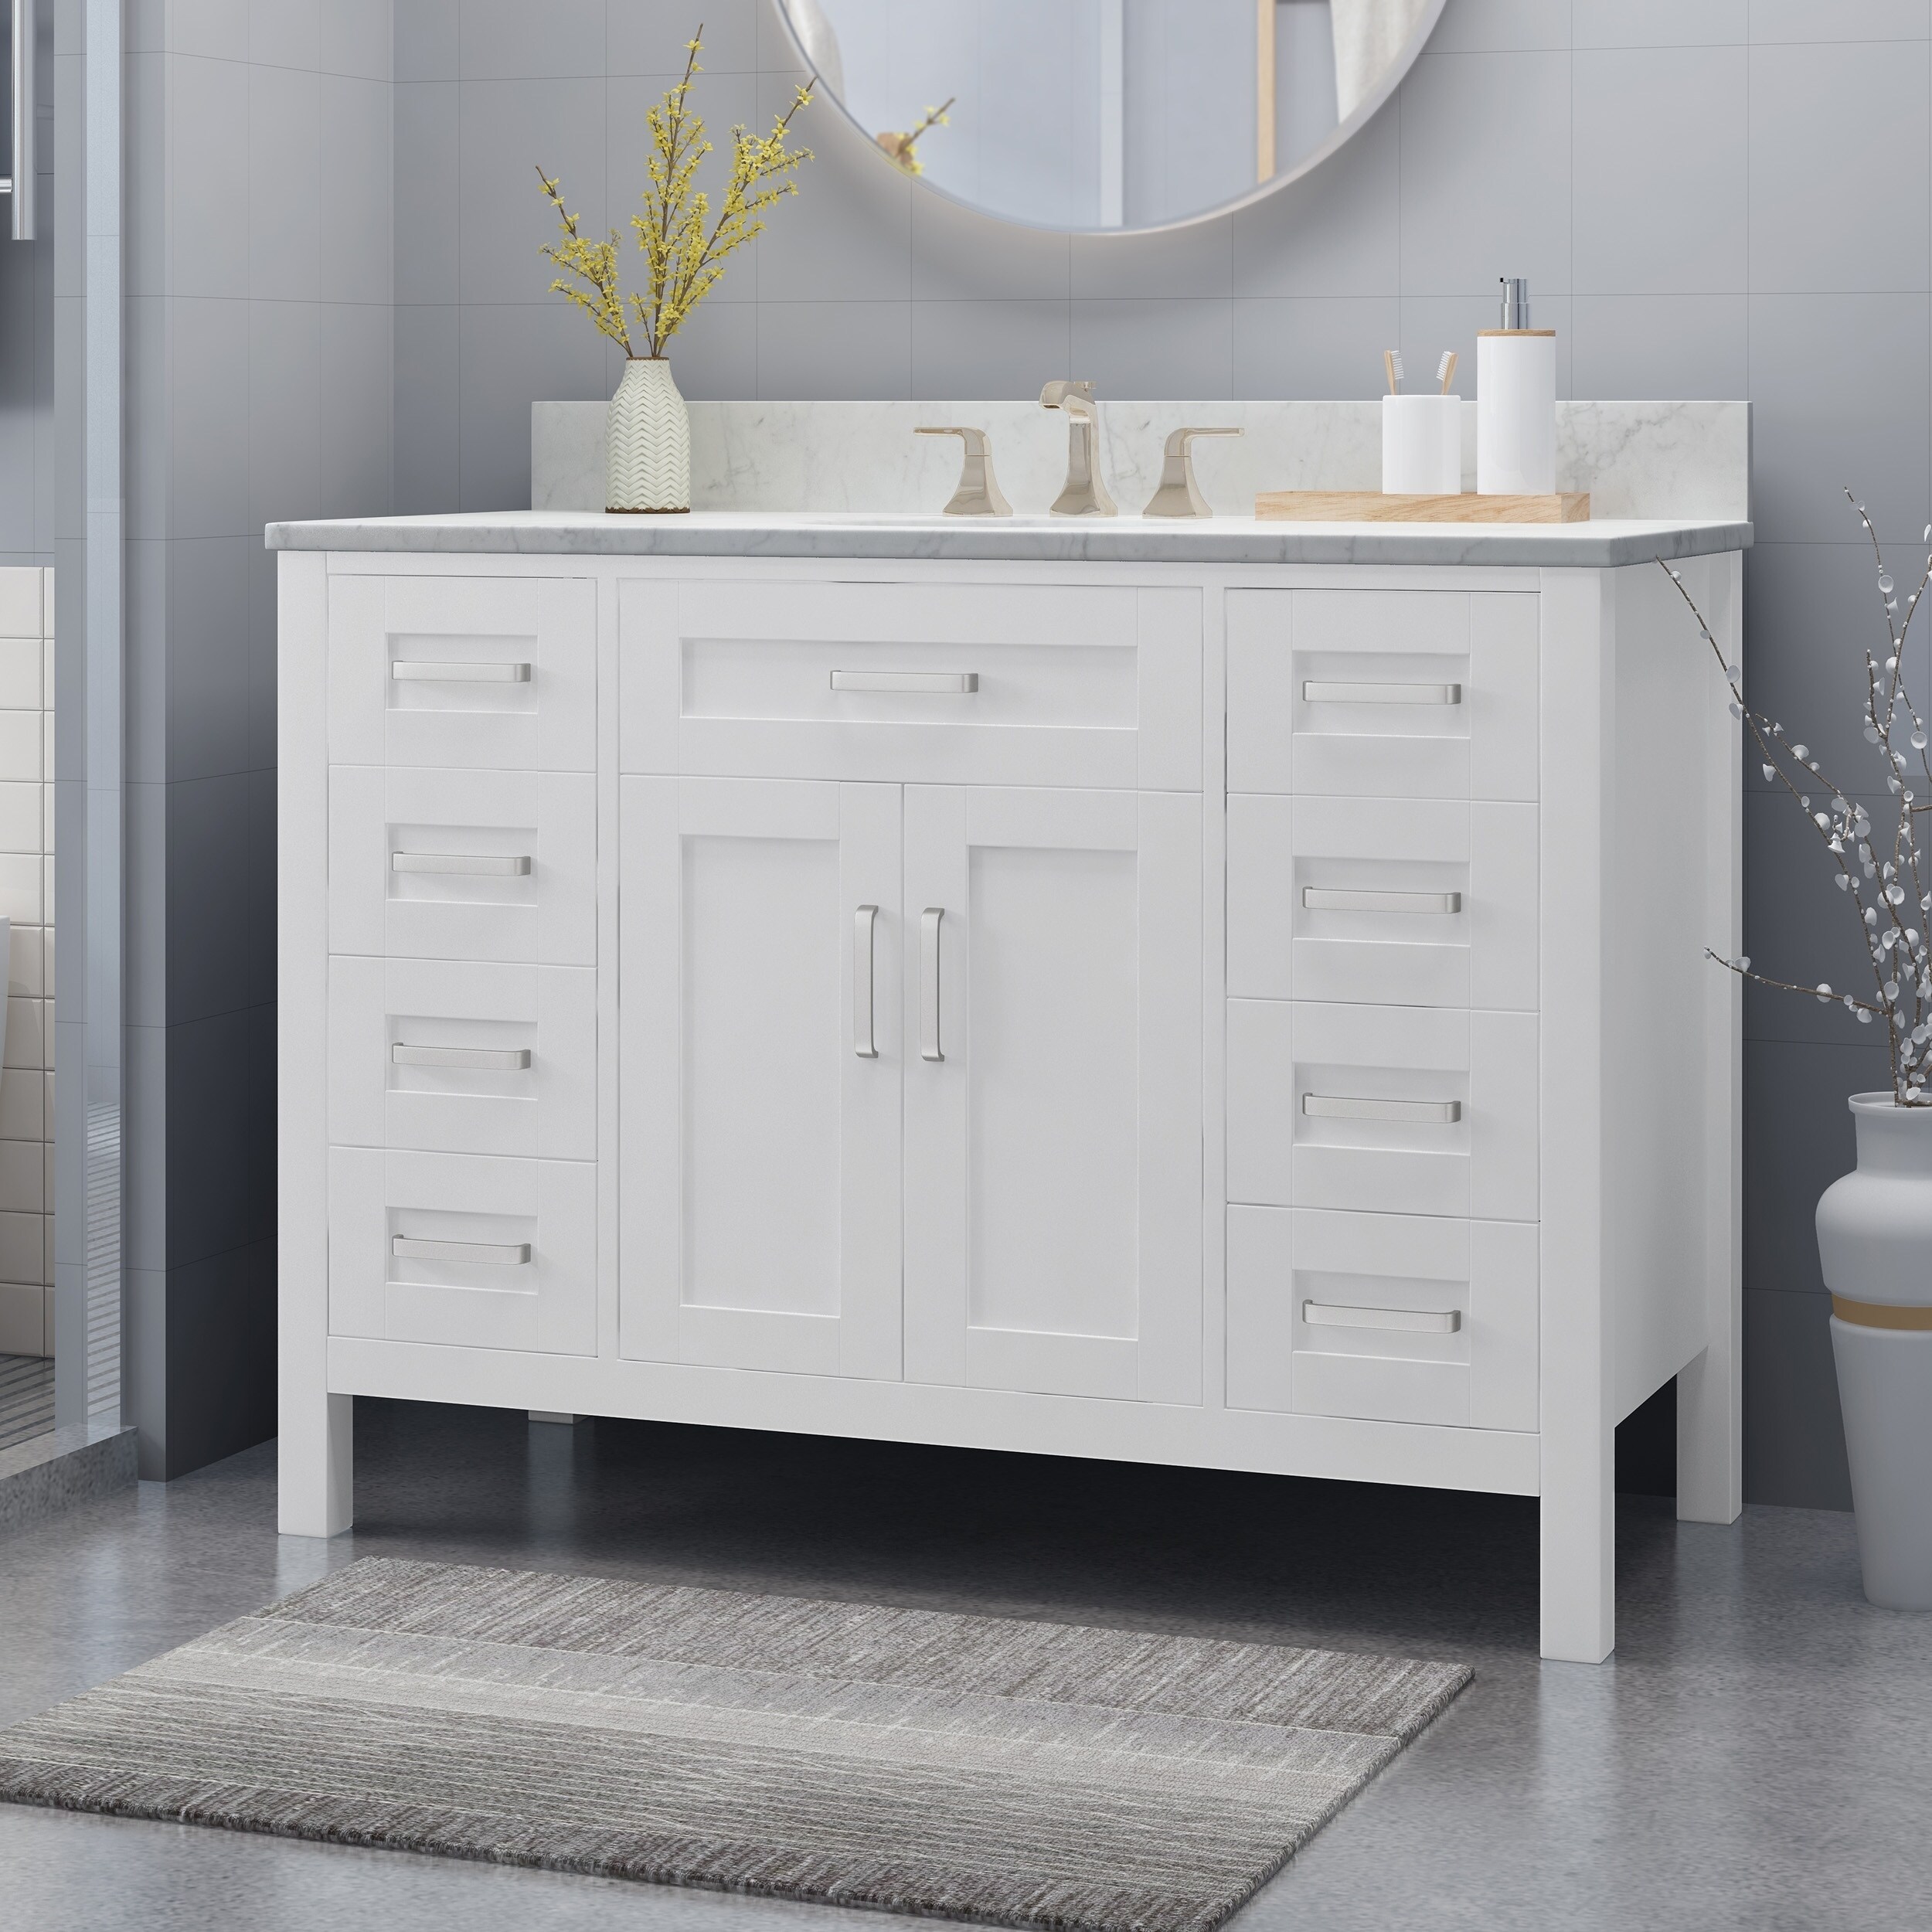 https://ak1.ostkcdn.com/images/products/25716175/Greeley-Contemporary-48-Wood-Single-Sink-Bathroom-Vanity-by-Christopher-Knight-Home-8ba3bbde-bff4-41f7-be87-41b9deb6e8b0.jpg